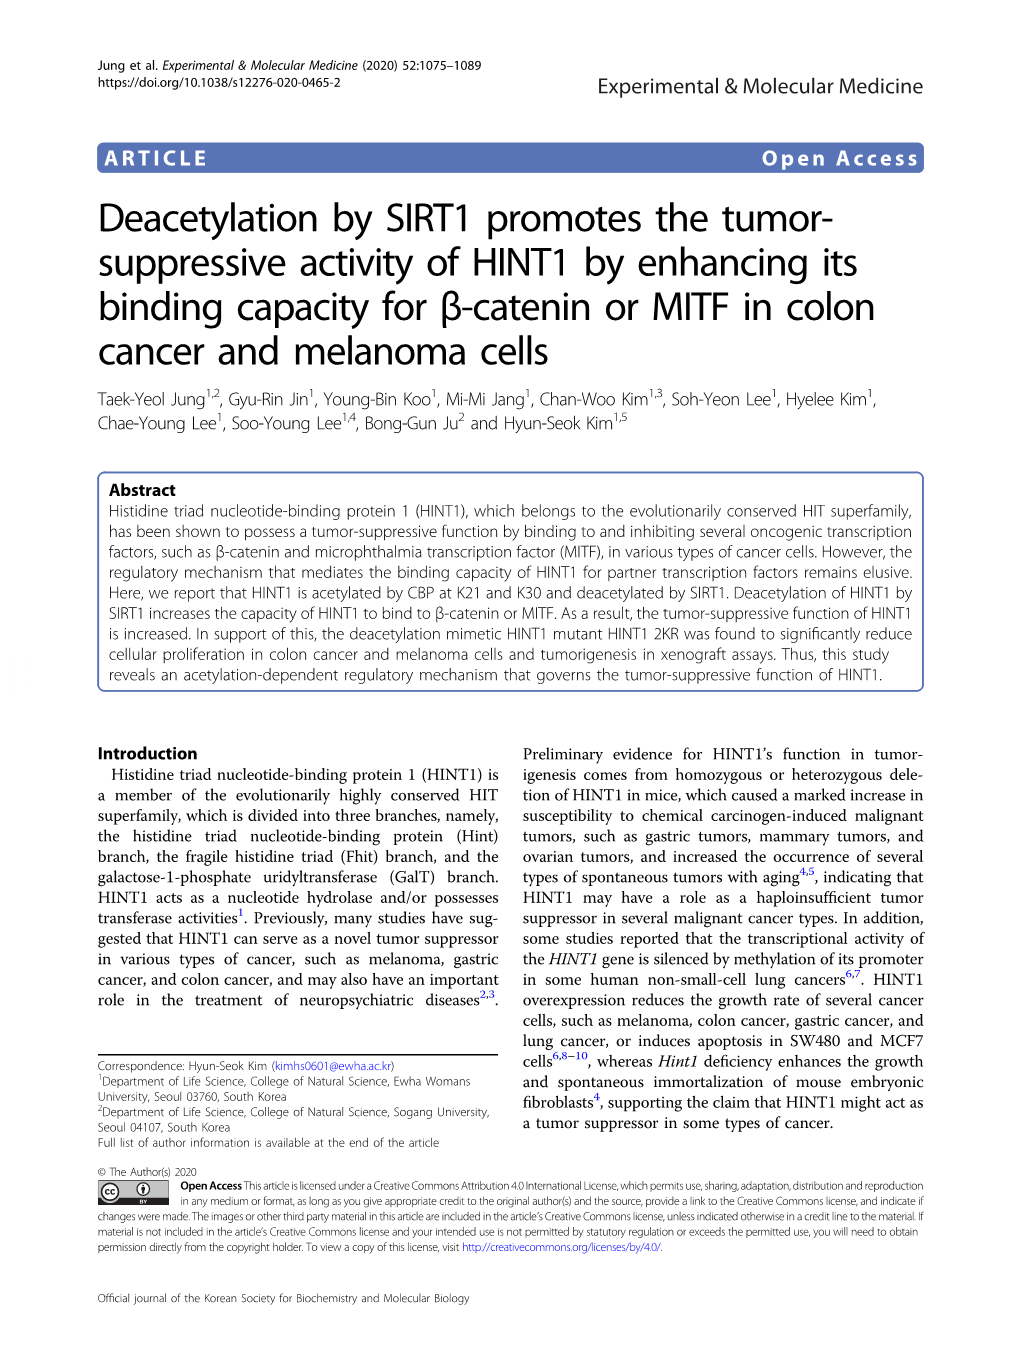 Deacetylation by SIRT1 Promotes the Tumor-Suppressive Activity of HINT1 by Enhancing Its Binding Capacity for Β-Catenin Or MITF